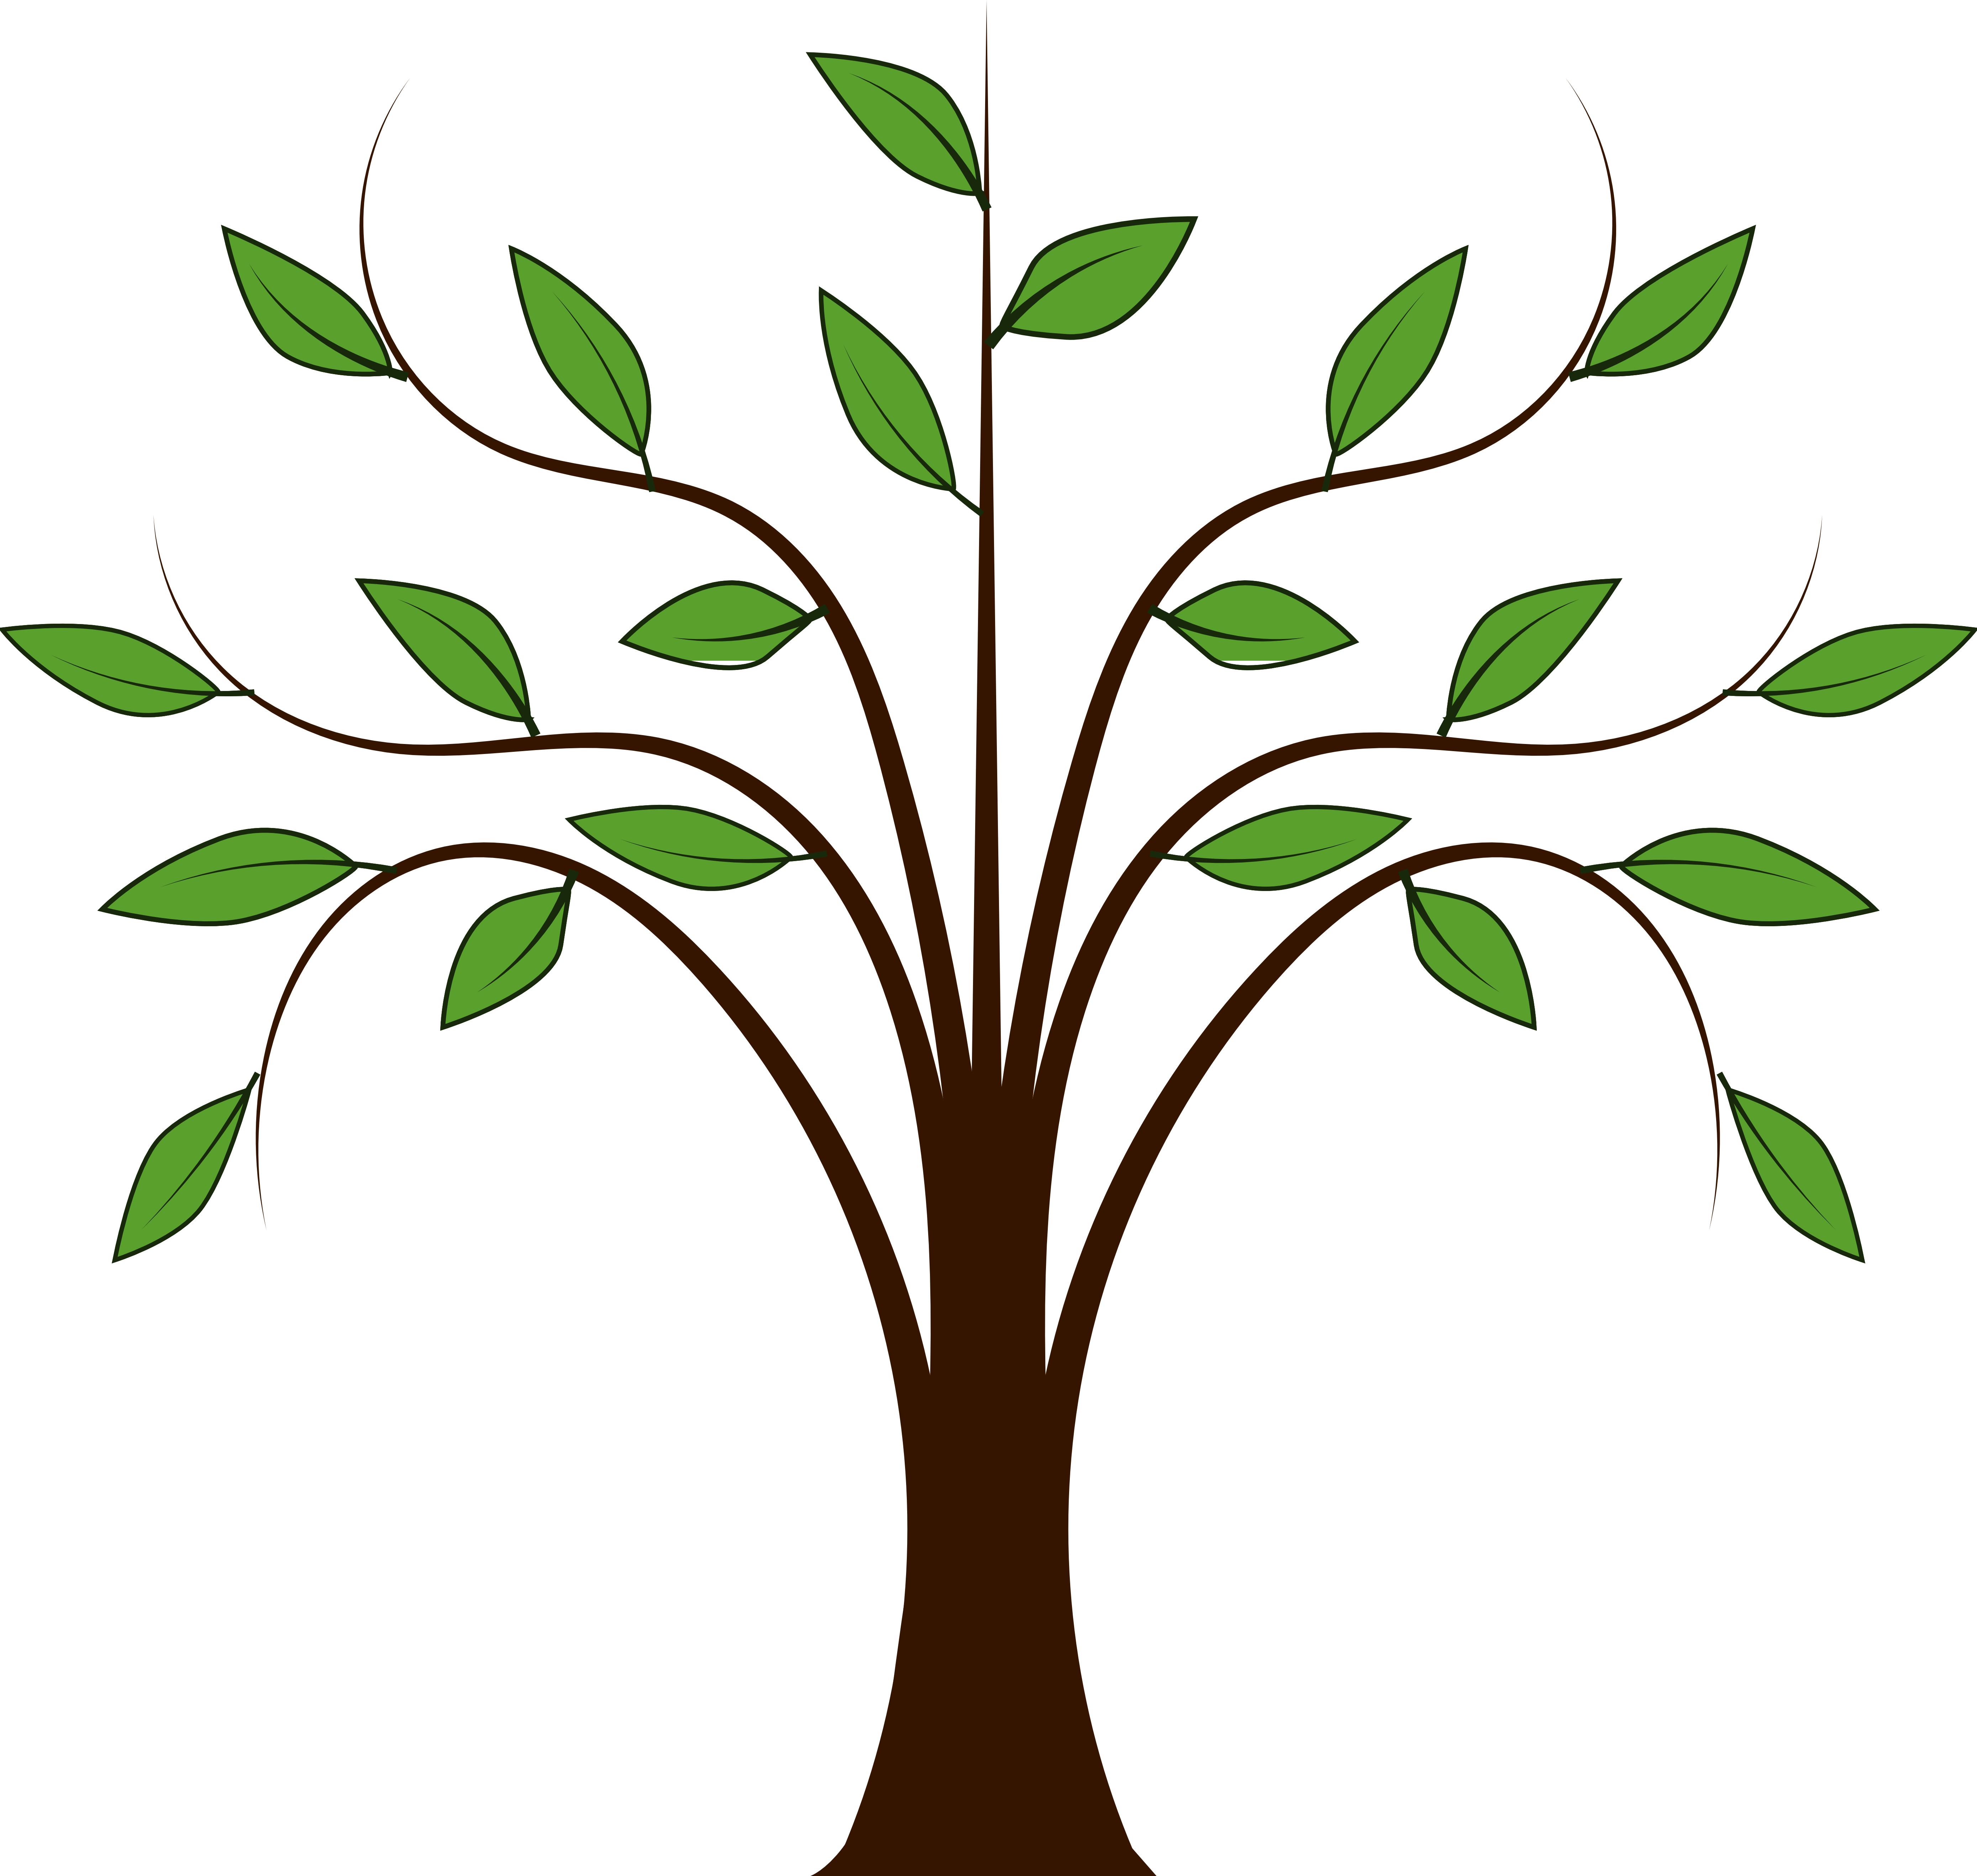 Tree Images Clipart - ClipArt Best